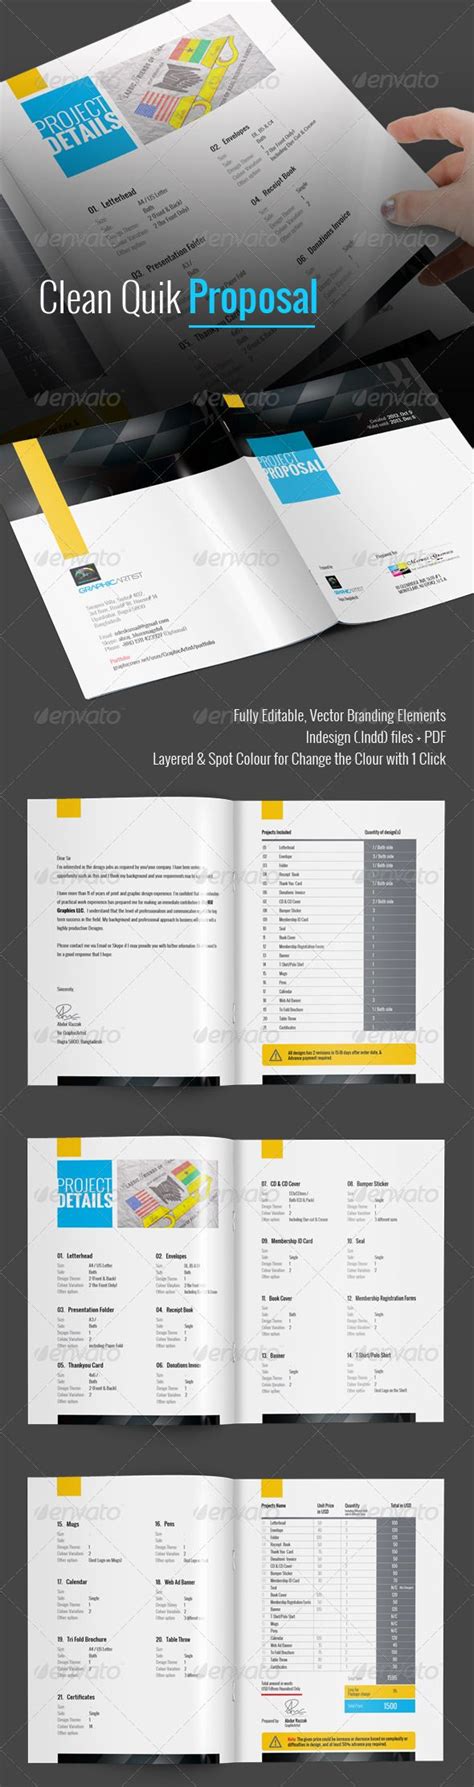 social media proposal  templates  win clients collection